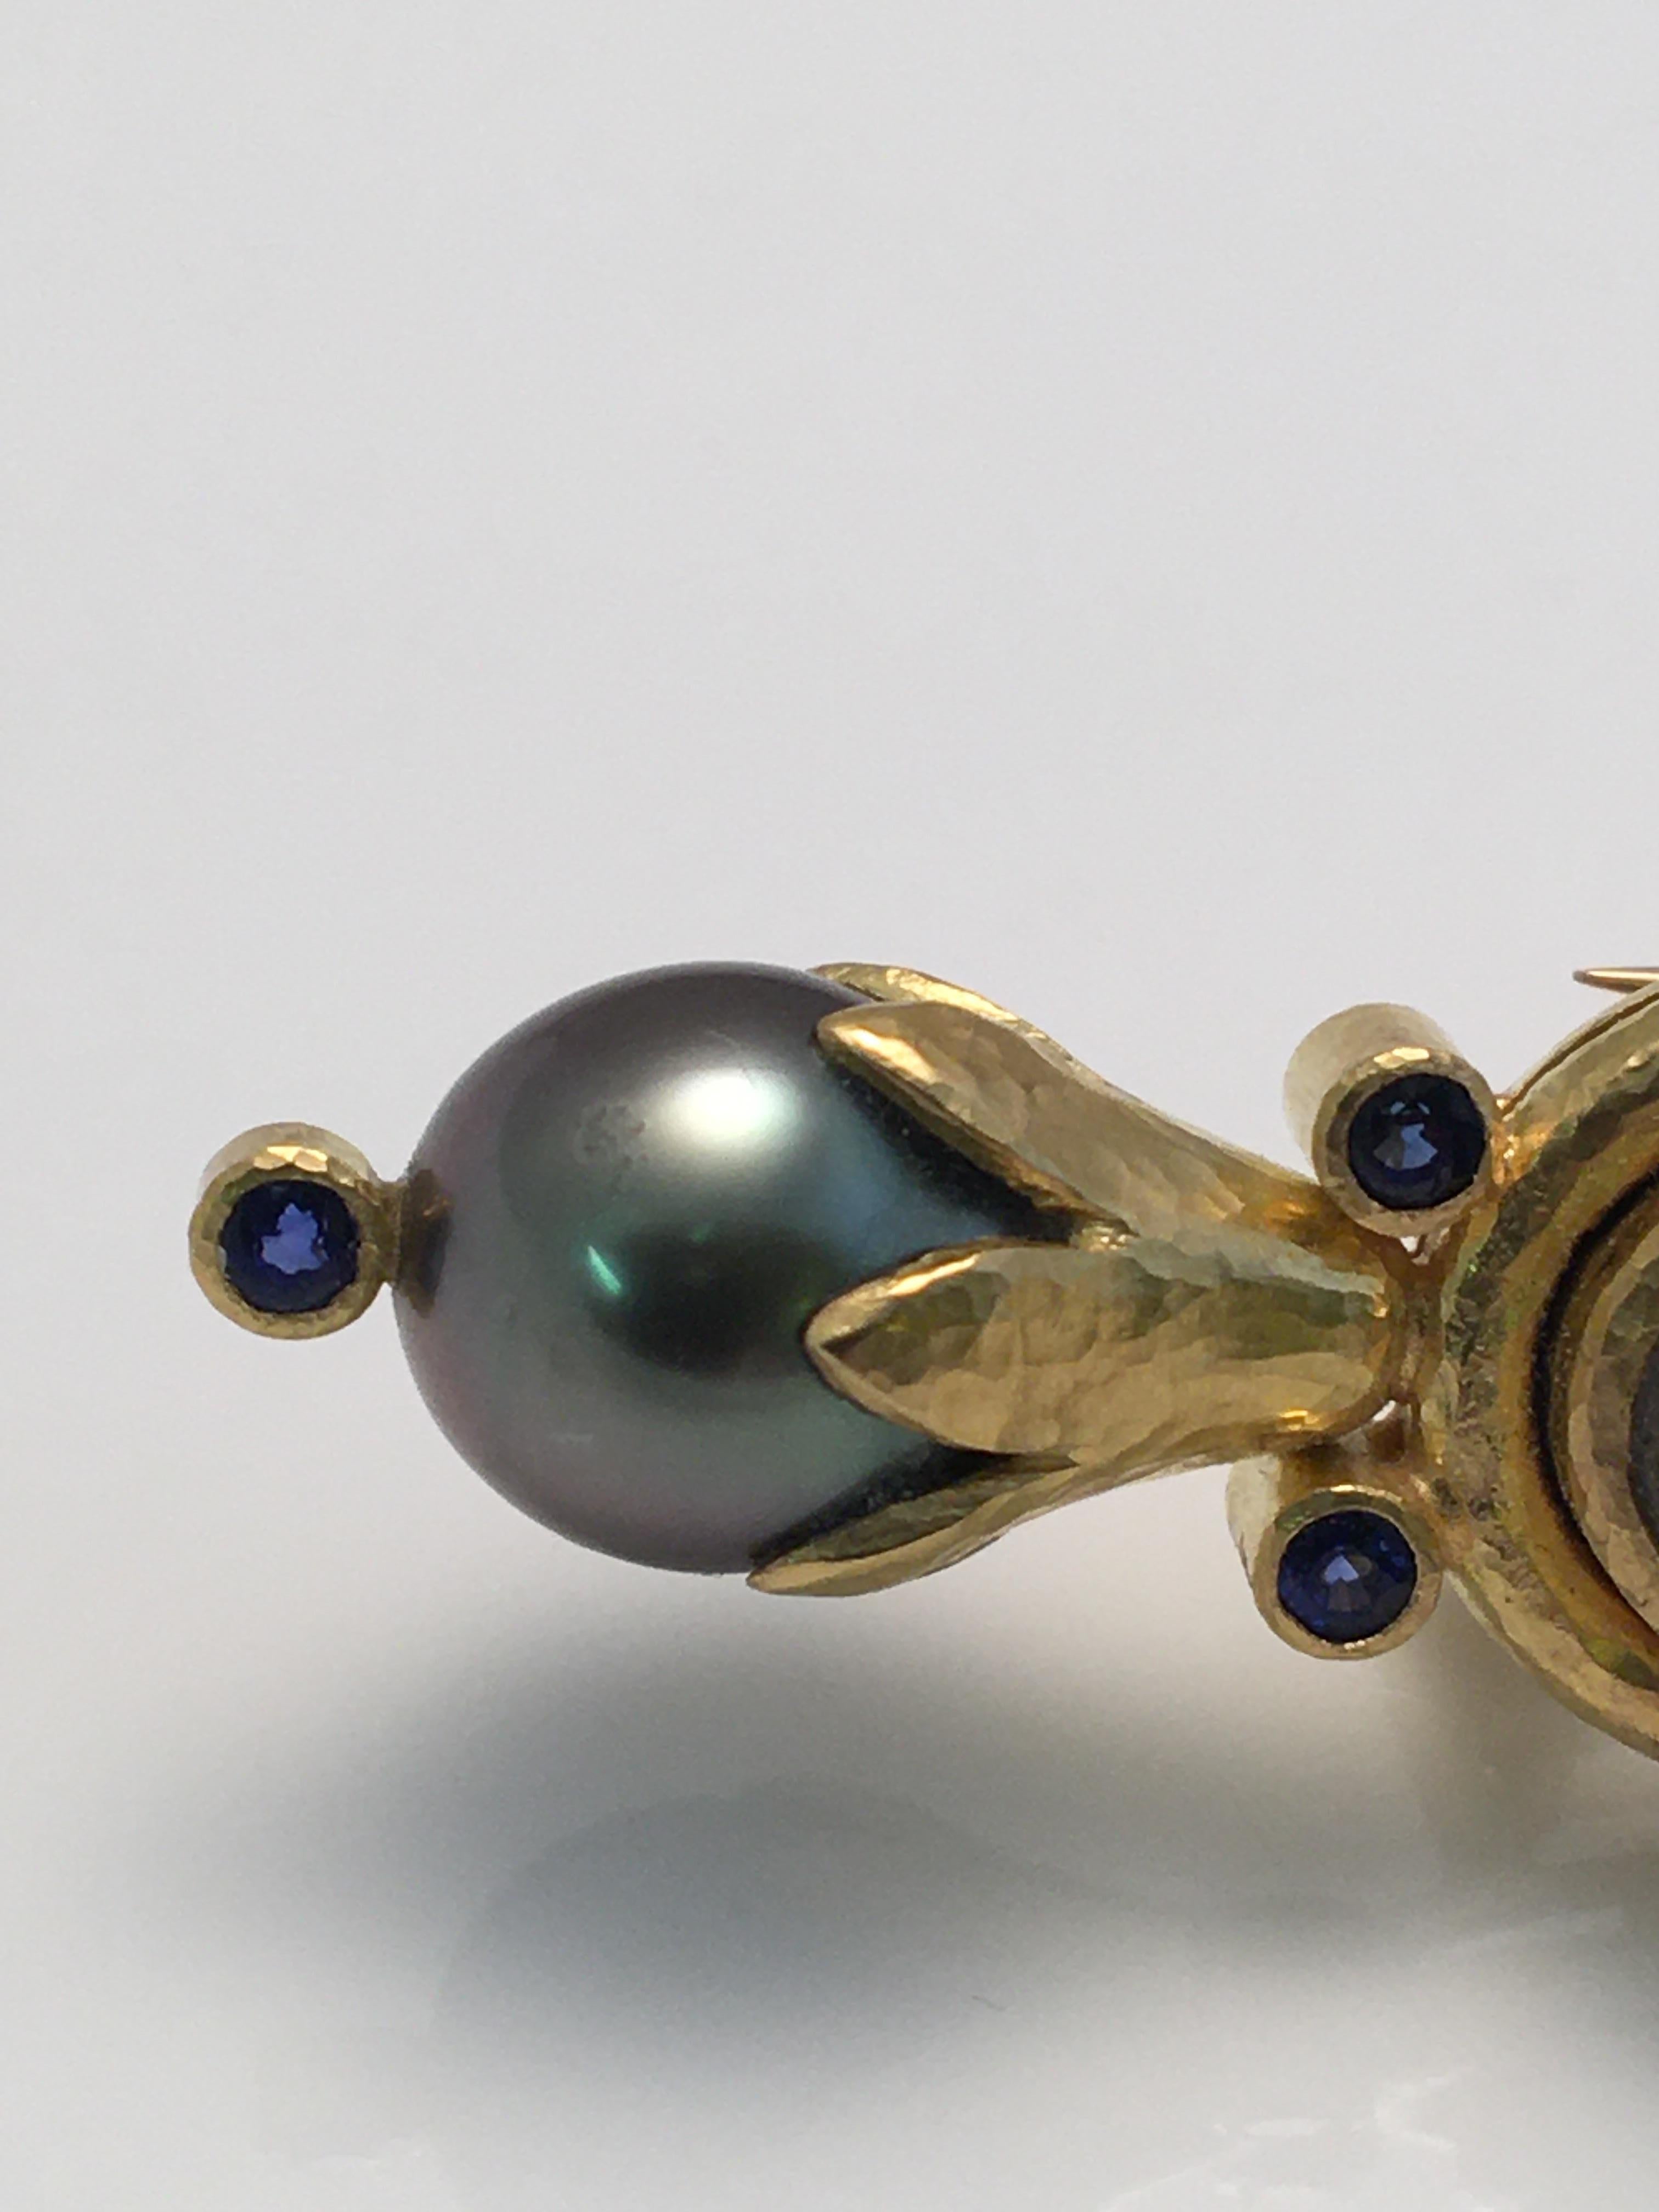 Elizabeth Locke
19 karat yellow gold
Oval labradorite approximately 18mm x 10mm
Two south sea black pearls, approximately 9.5-10.0mm
Six round blue sapphires, approximately 2.5mm each
Double pin hinged clasp with safety
Can be worn horizontal or